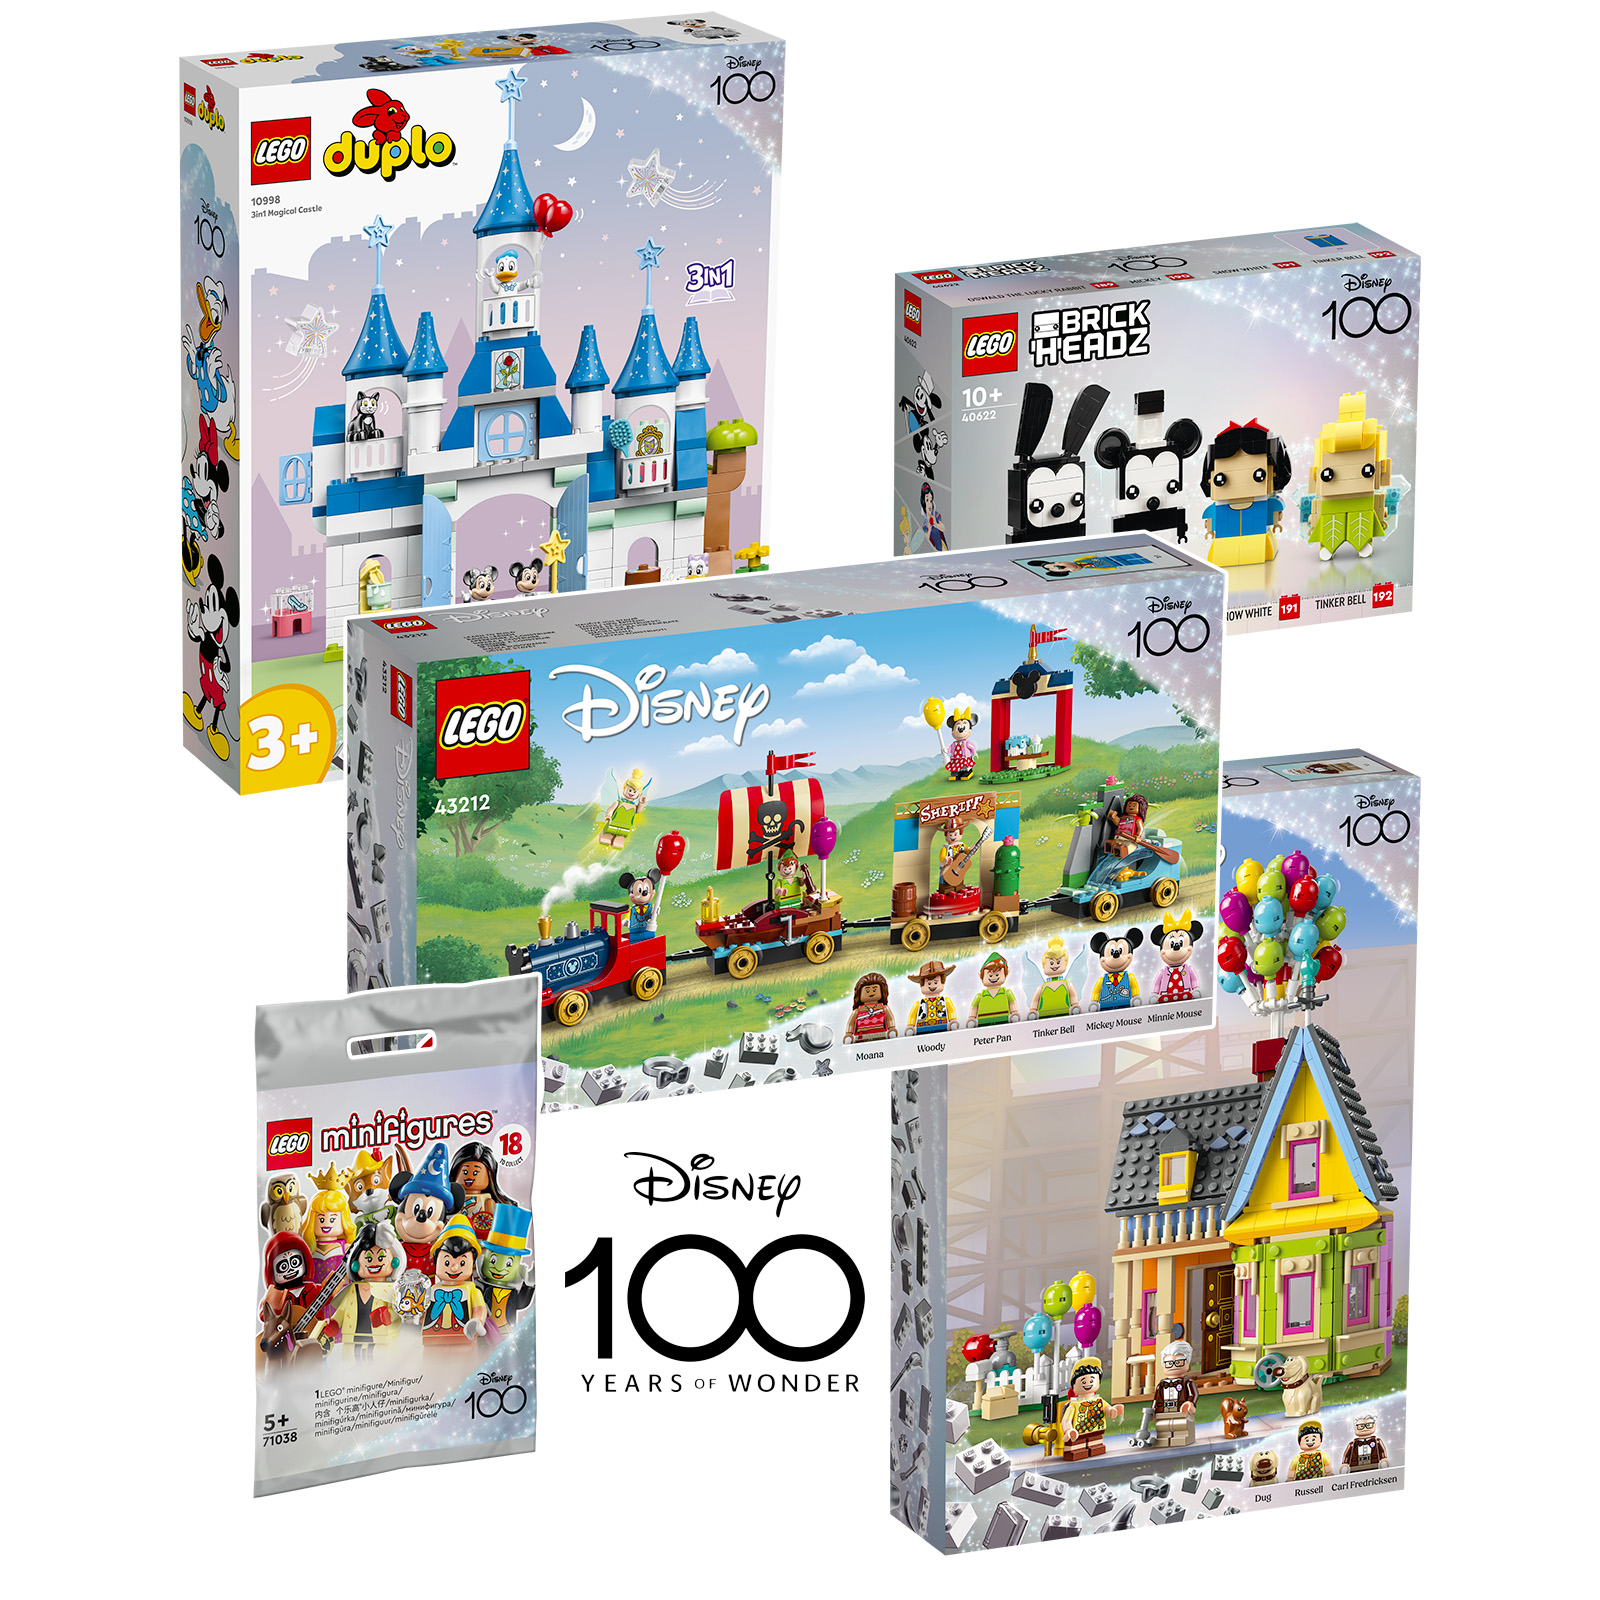 The Latest Disney 100th Anniversary LEGO Set ('Up' House) Sells Out